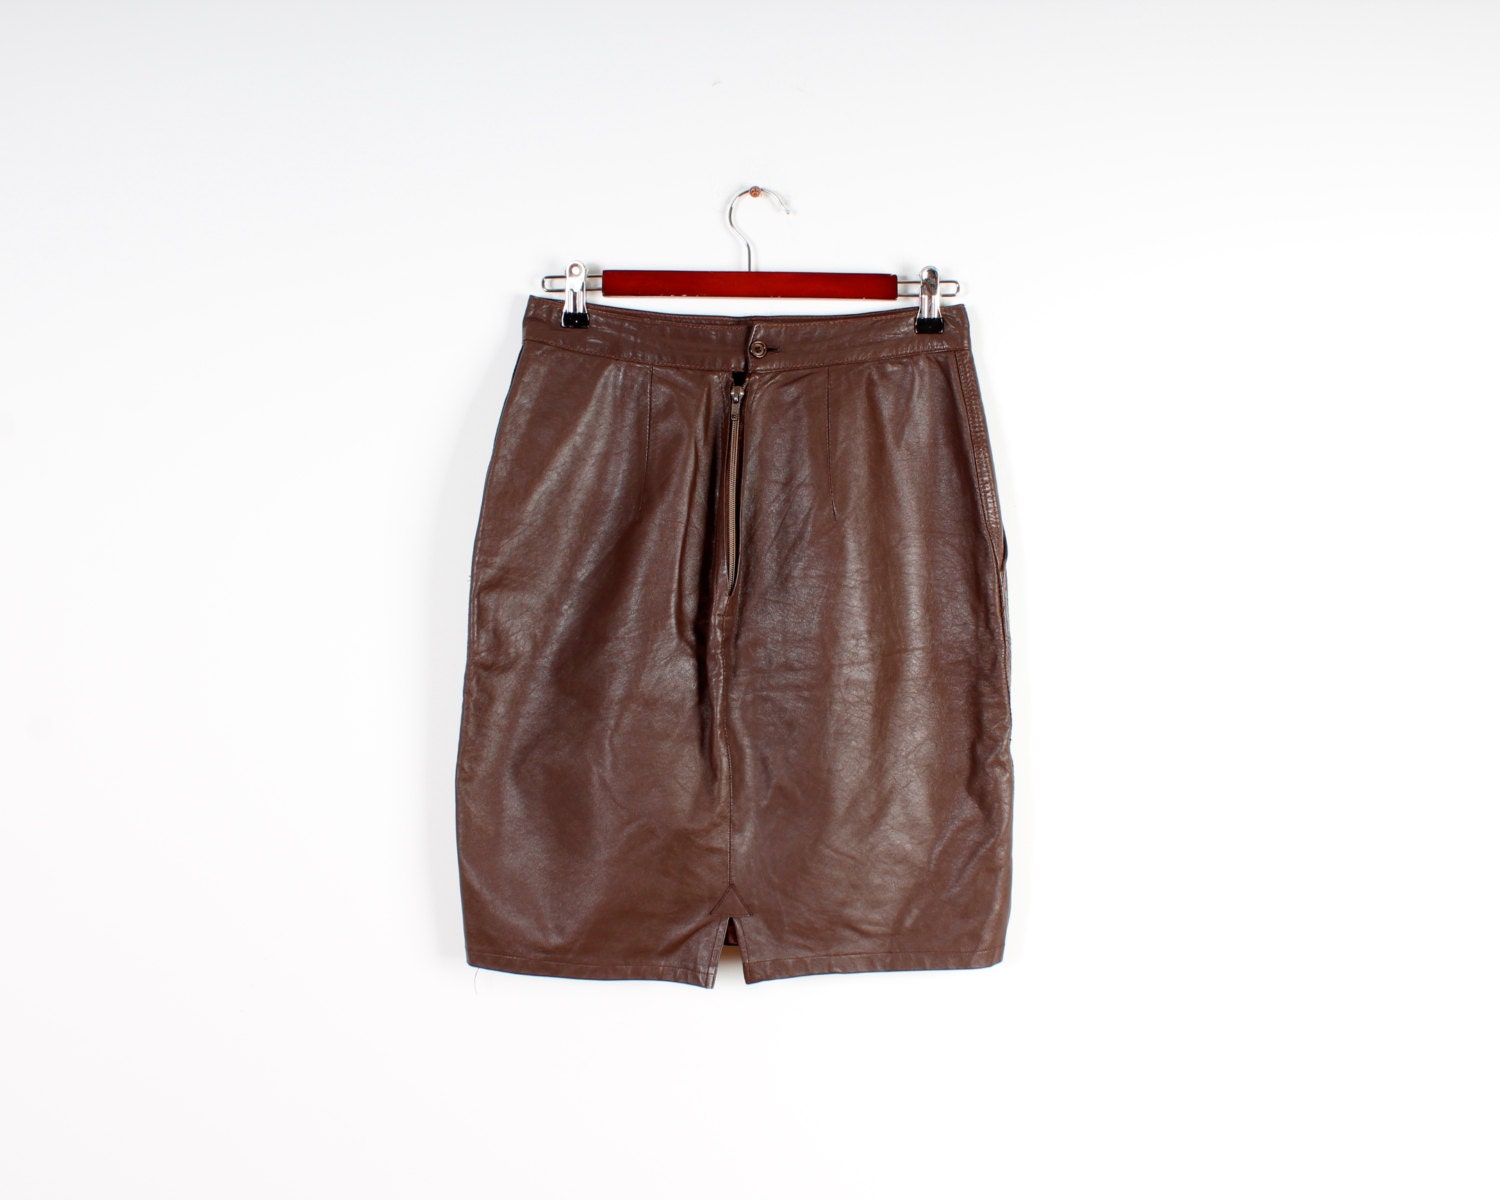 Vegan Leather Skirts Brown Vintage Pencil Skirt Faux Leather - Etsy